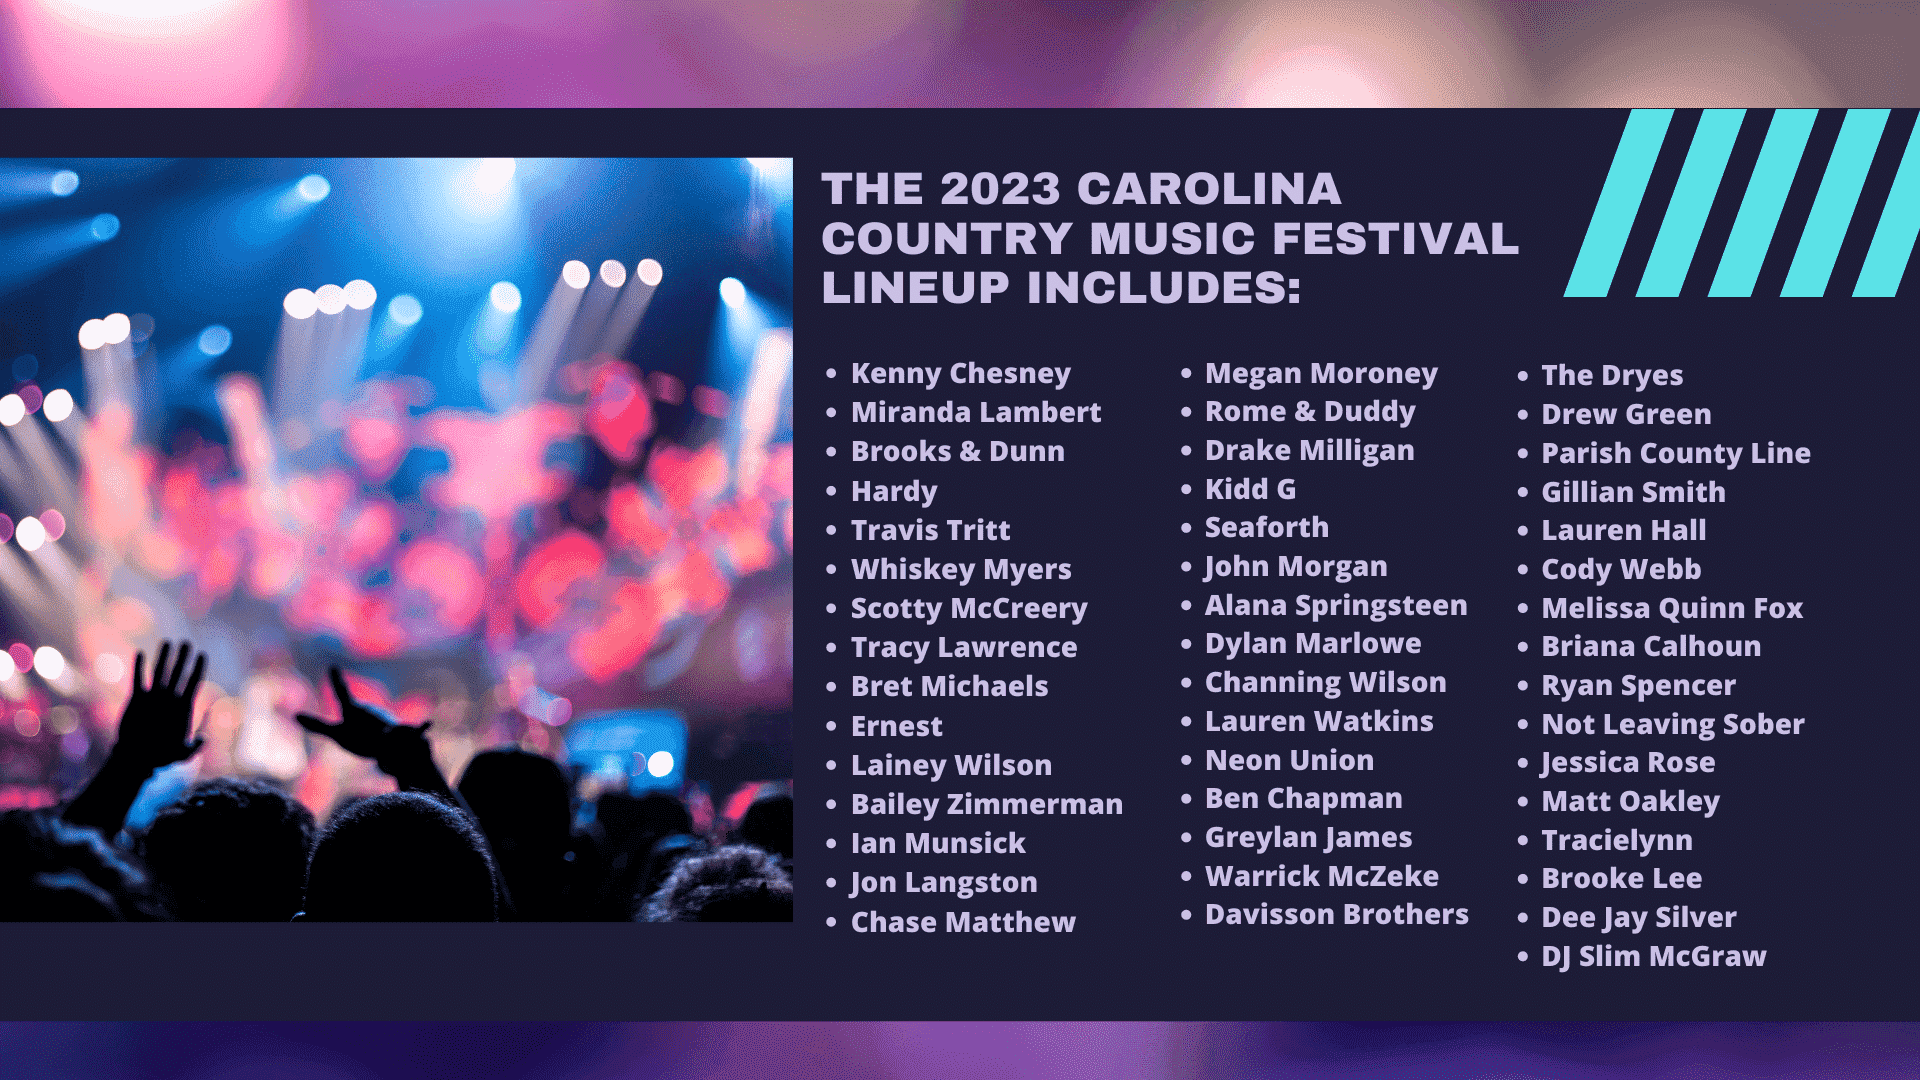 Experience the 2023 Carolina Country Music Festival in Myrtle Beach S.H. June